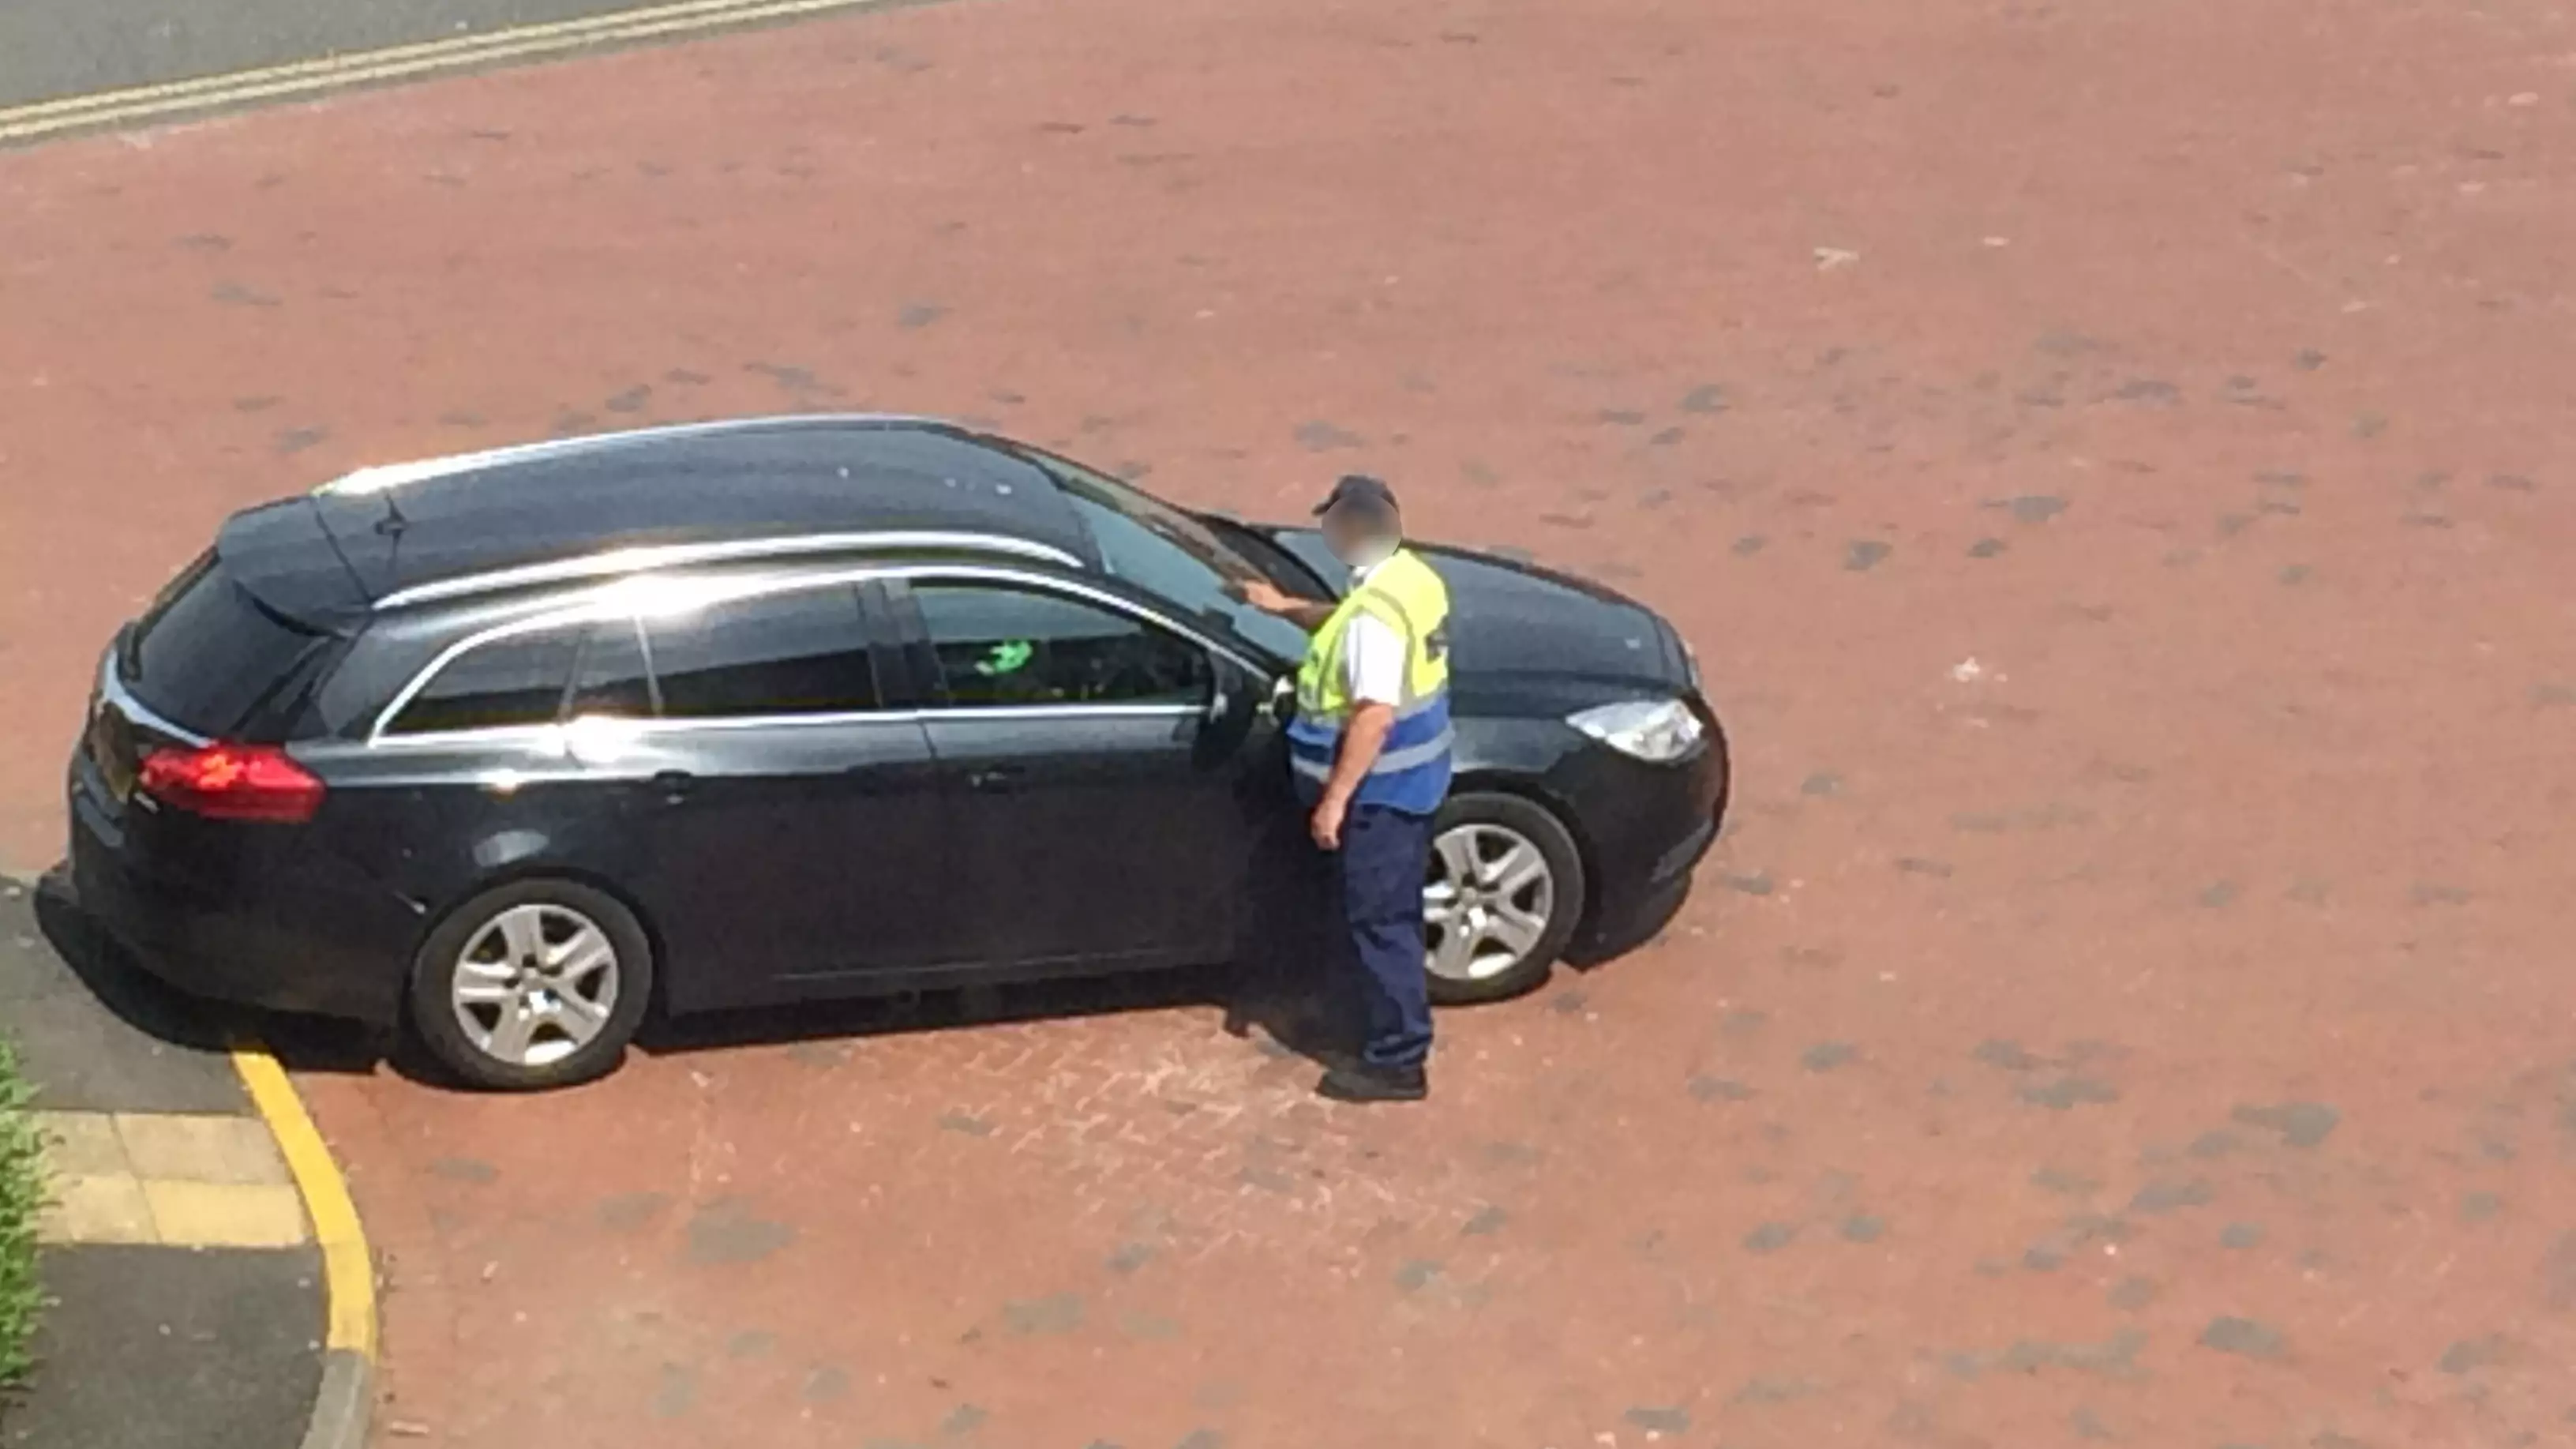 Parking Warden Tickets Funeral Car Whilst Driver Helps Load A Body